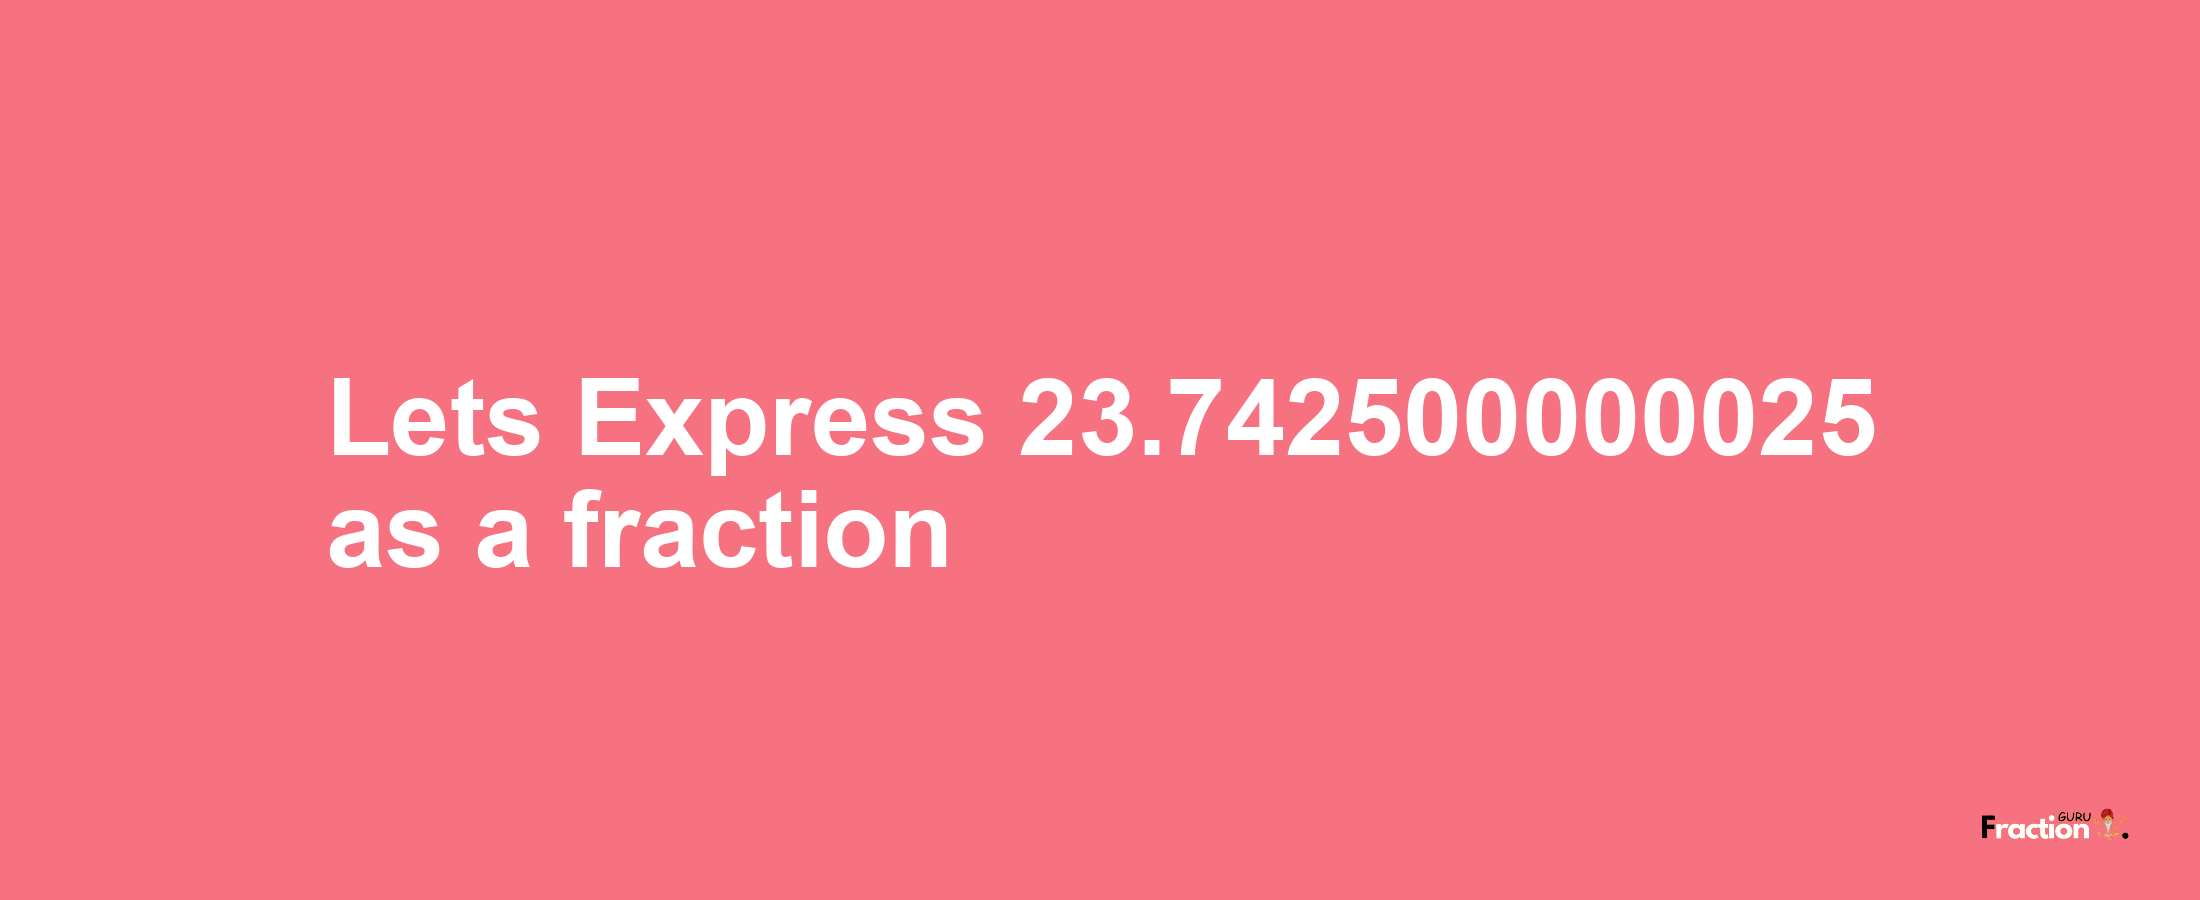 Lets Express 23.742500000025 as afraction